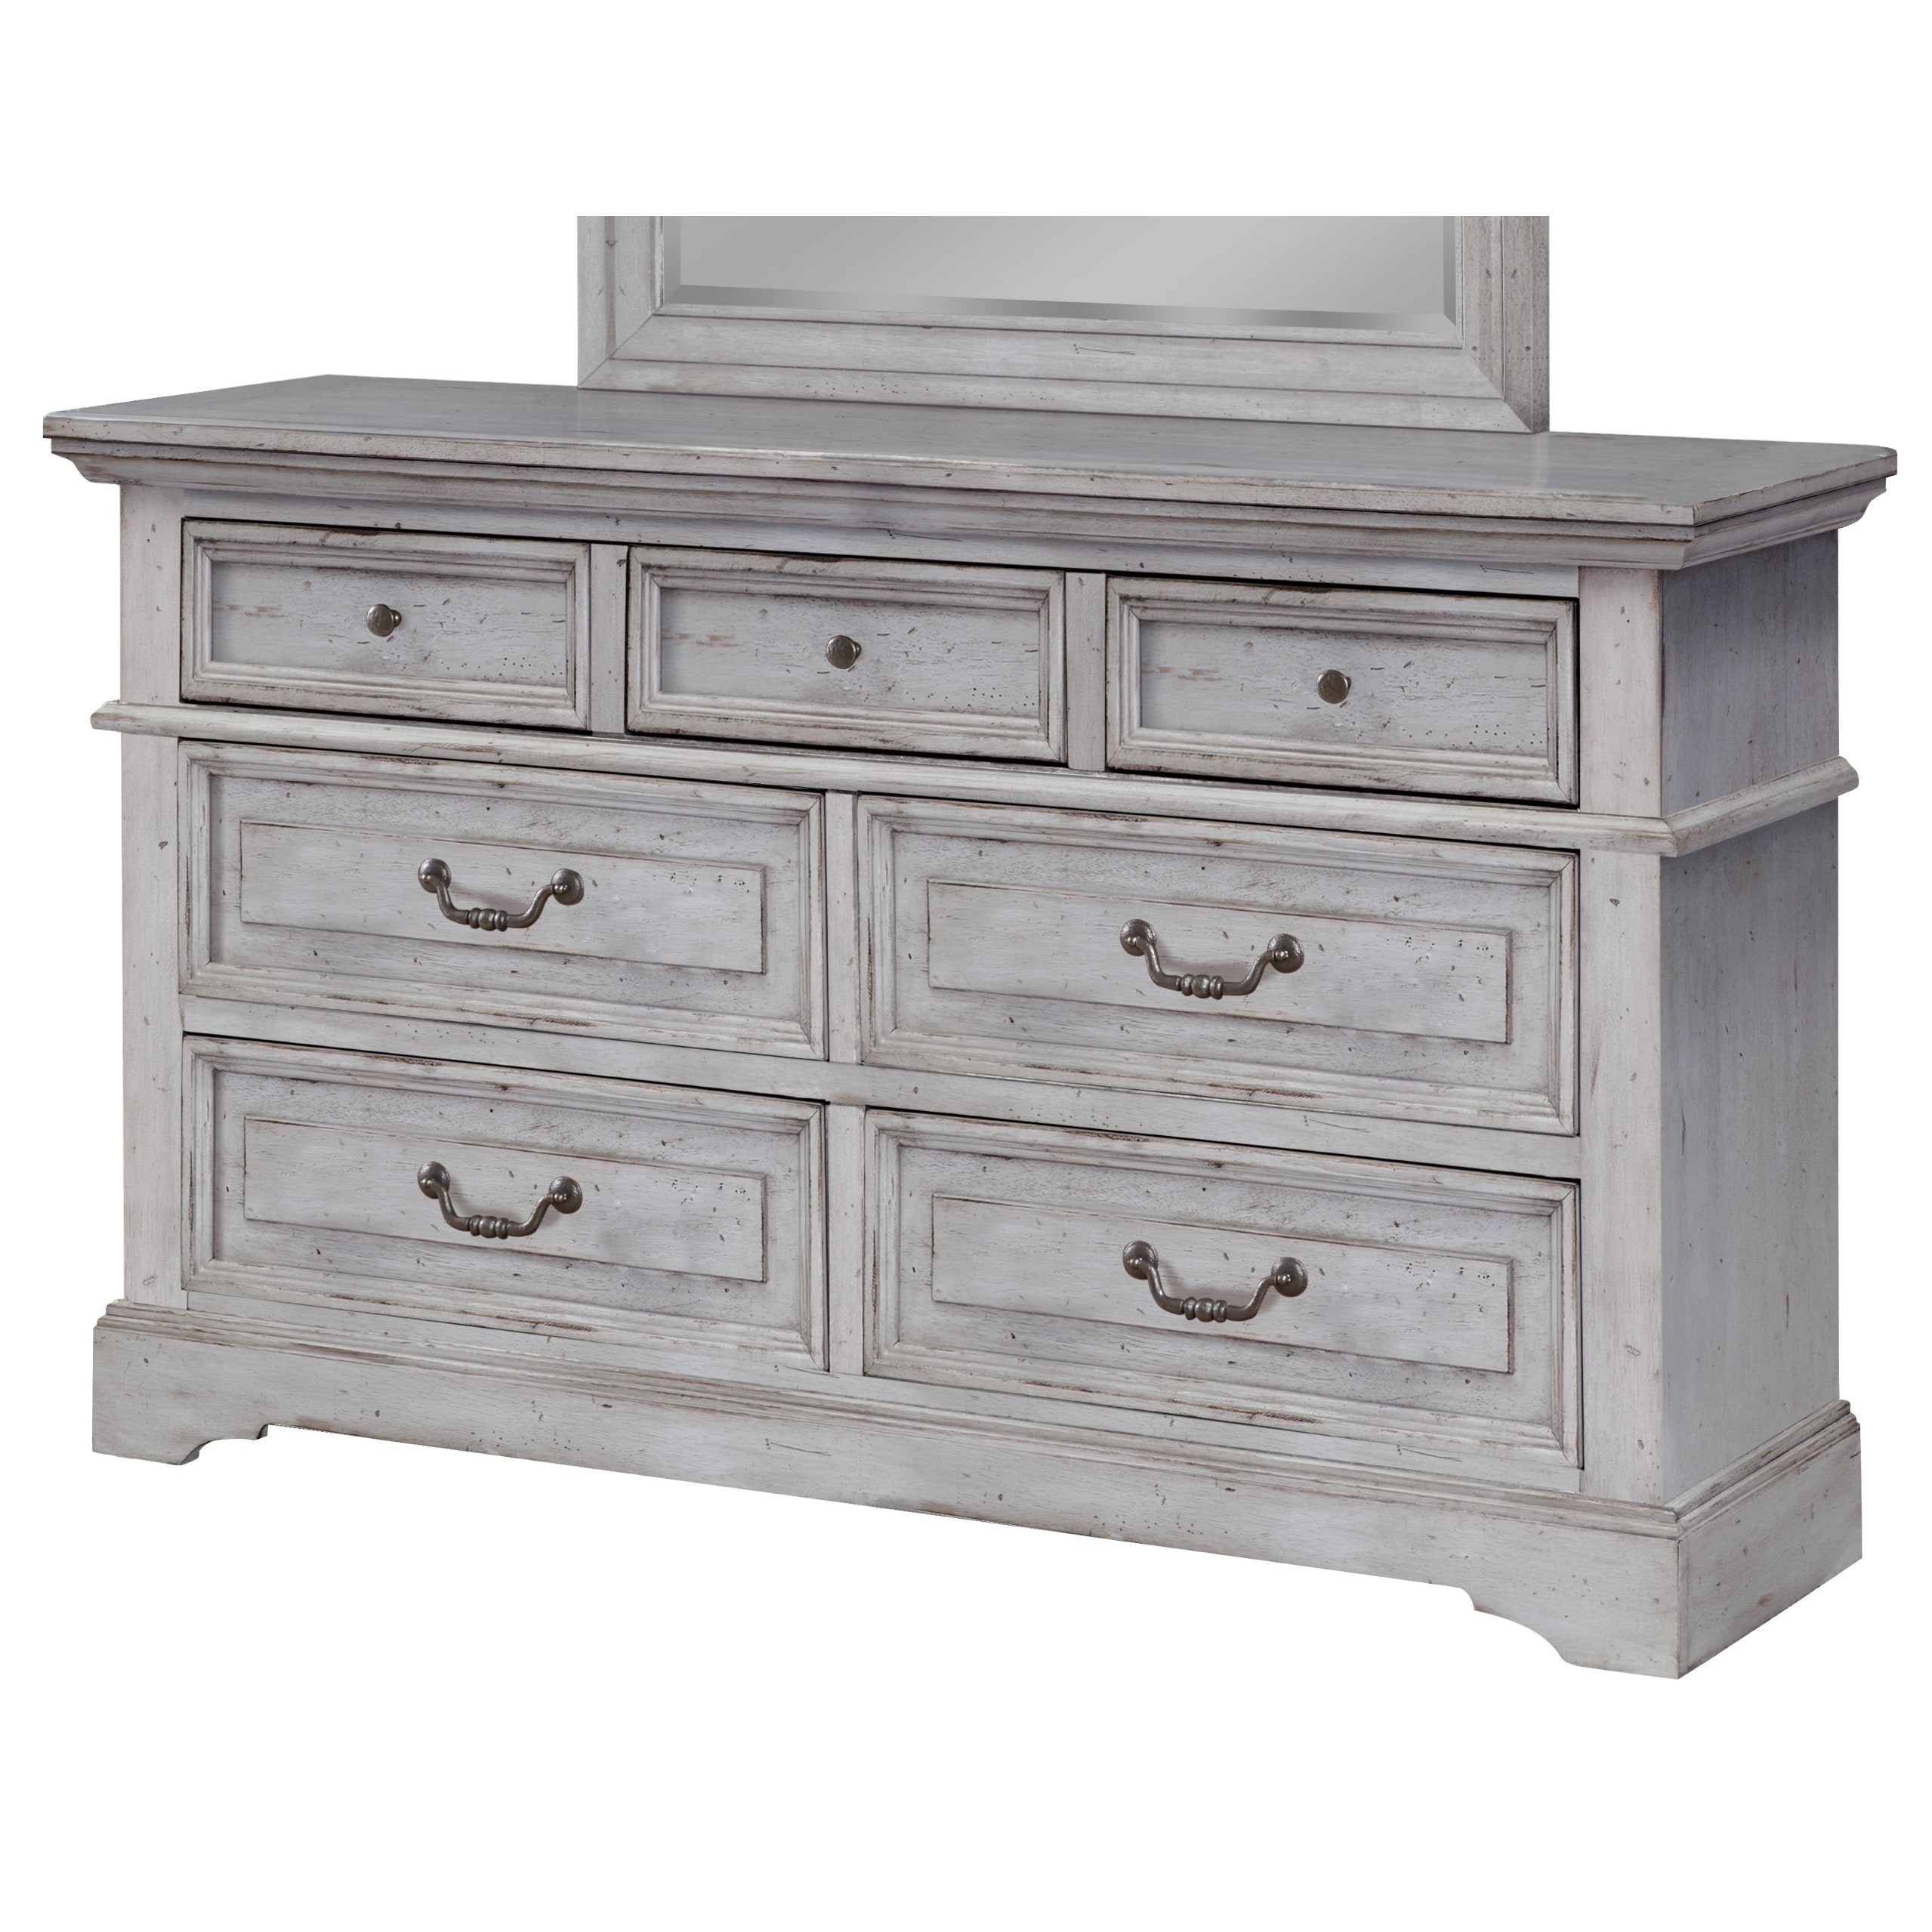 Shop Lakewood Distressed Wood Dresser With Optional Mirror By